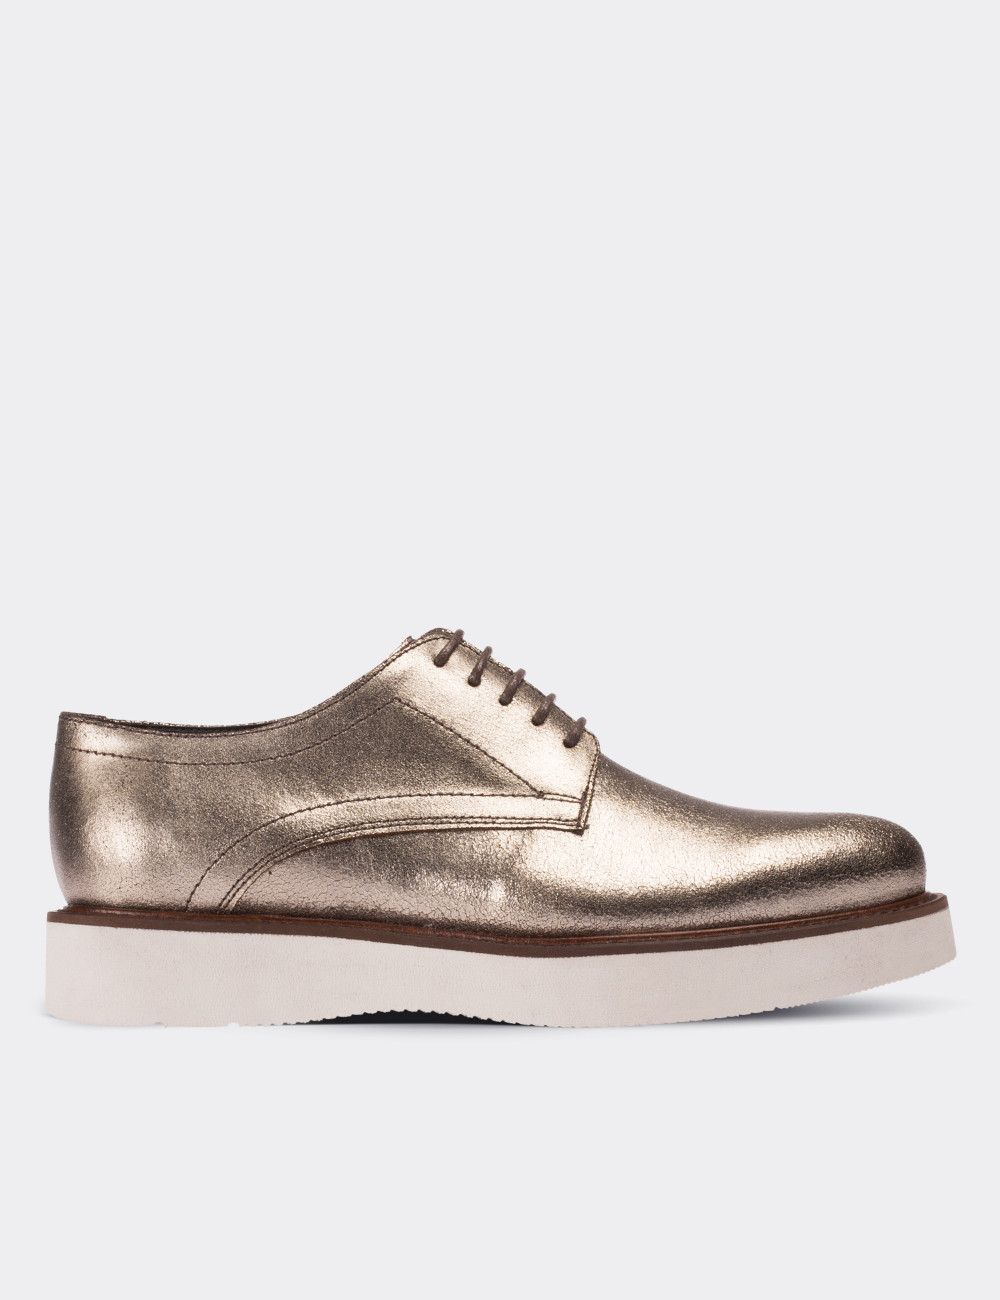 Gold Calfskin Leather Lace-up Shoes - Deery